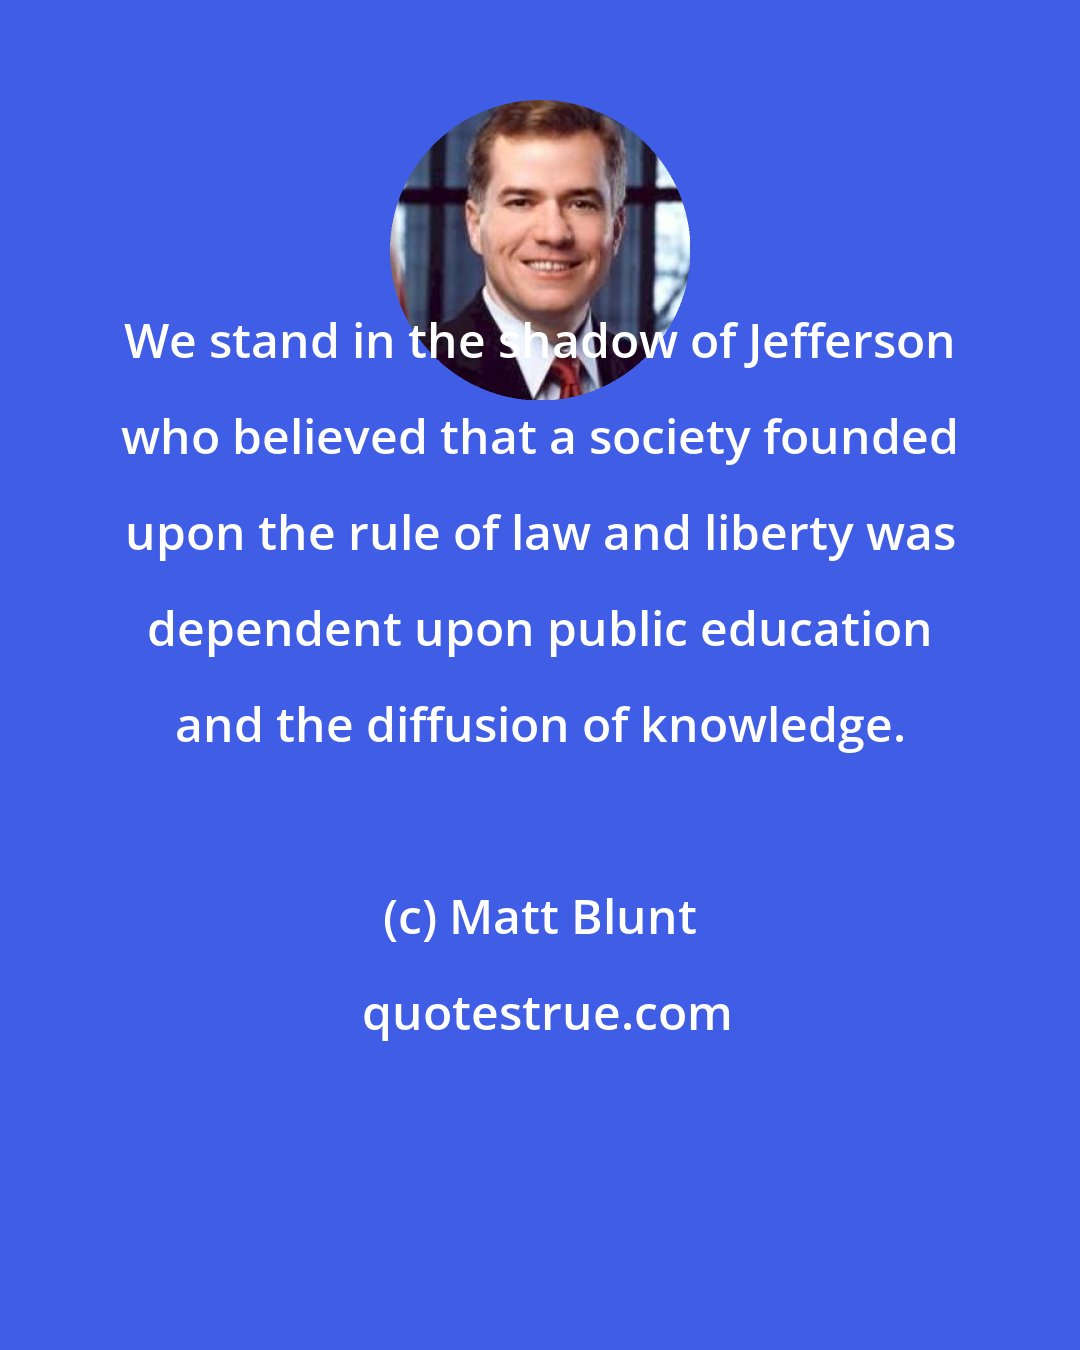 Matt Blunt: We stand in the shadow of Jefferson who believed that a society founded upon the rule of law and liberty was dependent upon public education and the diffusion of knowledge.